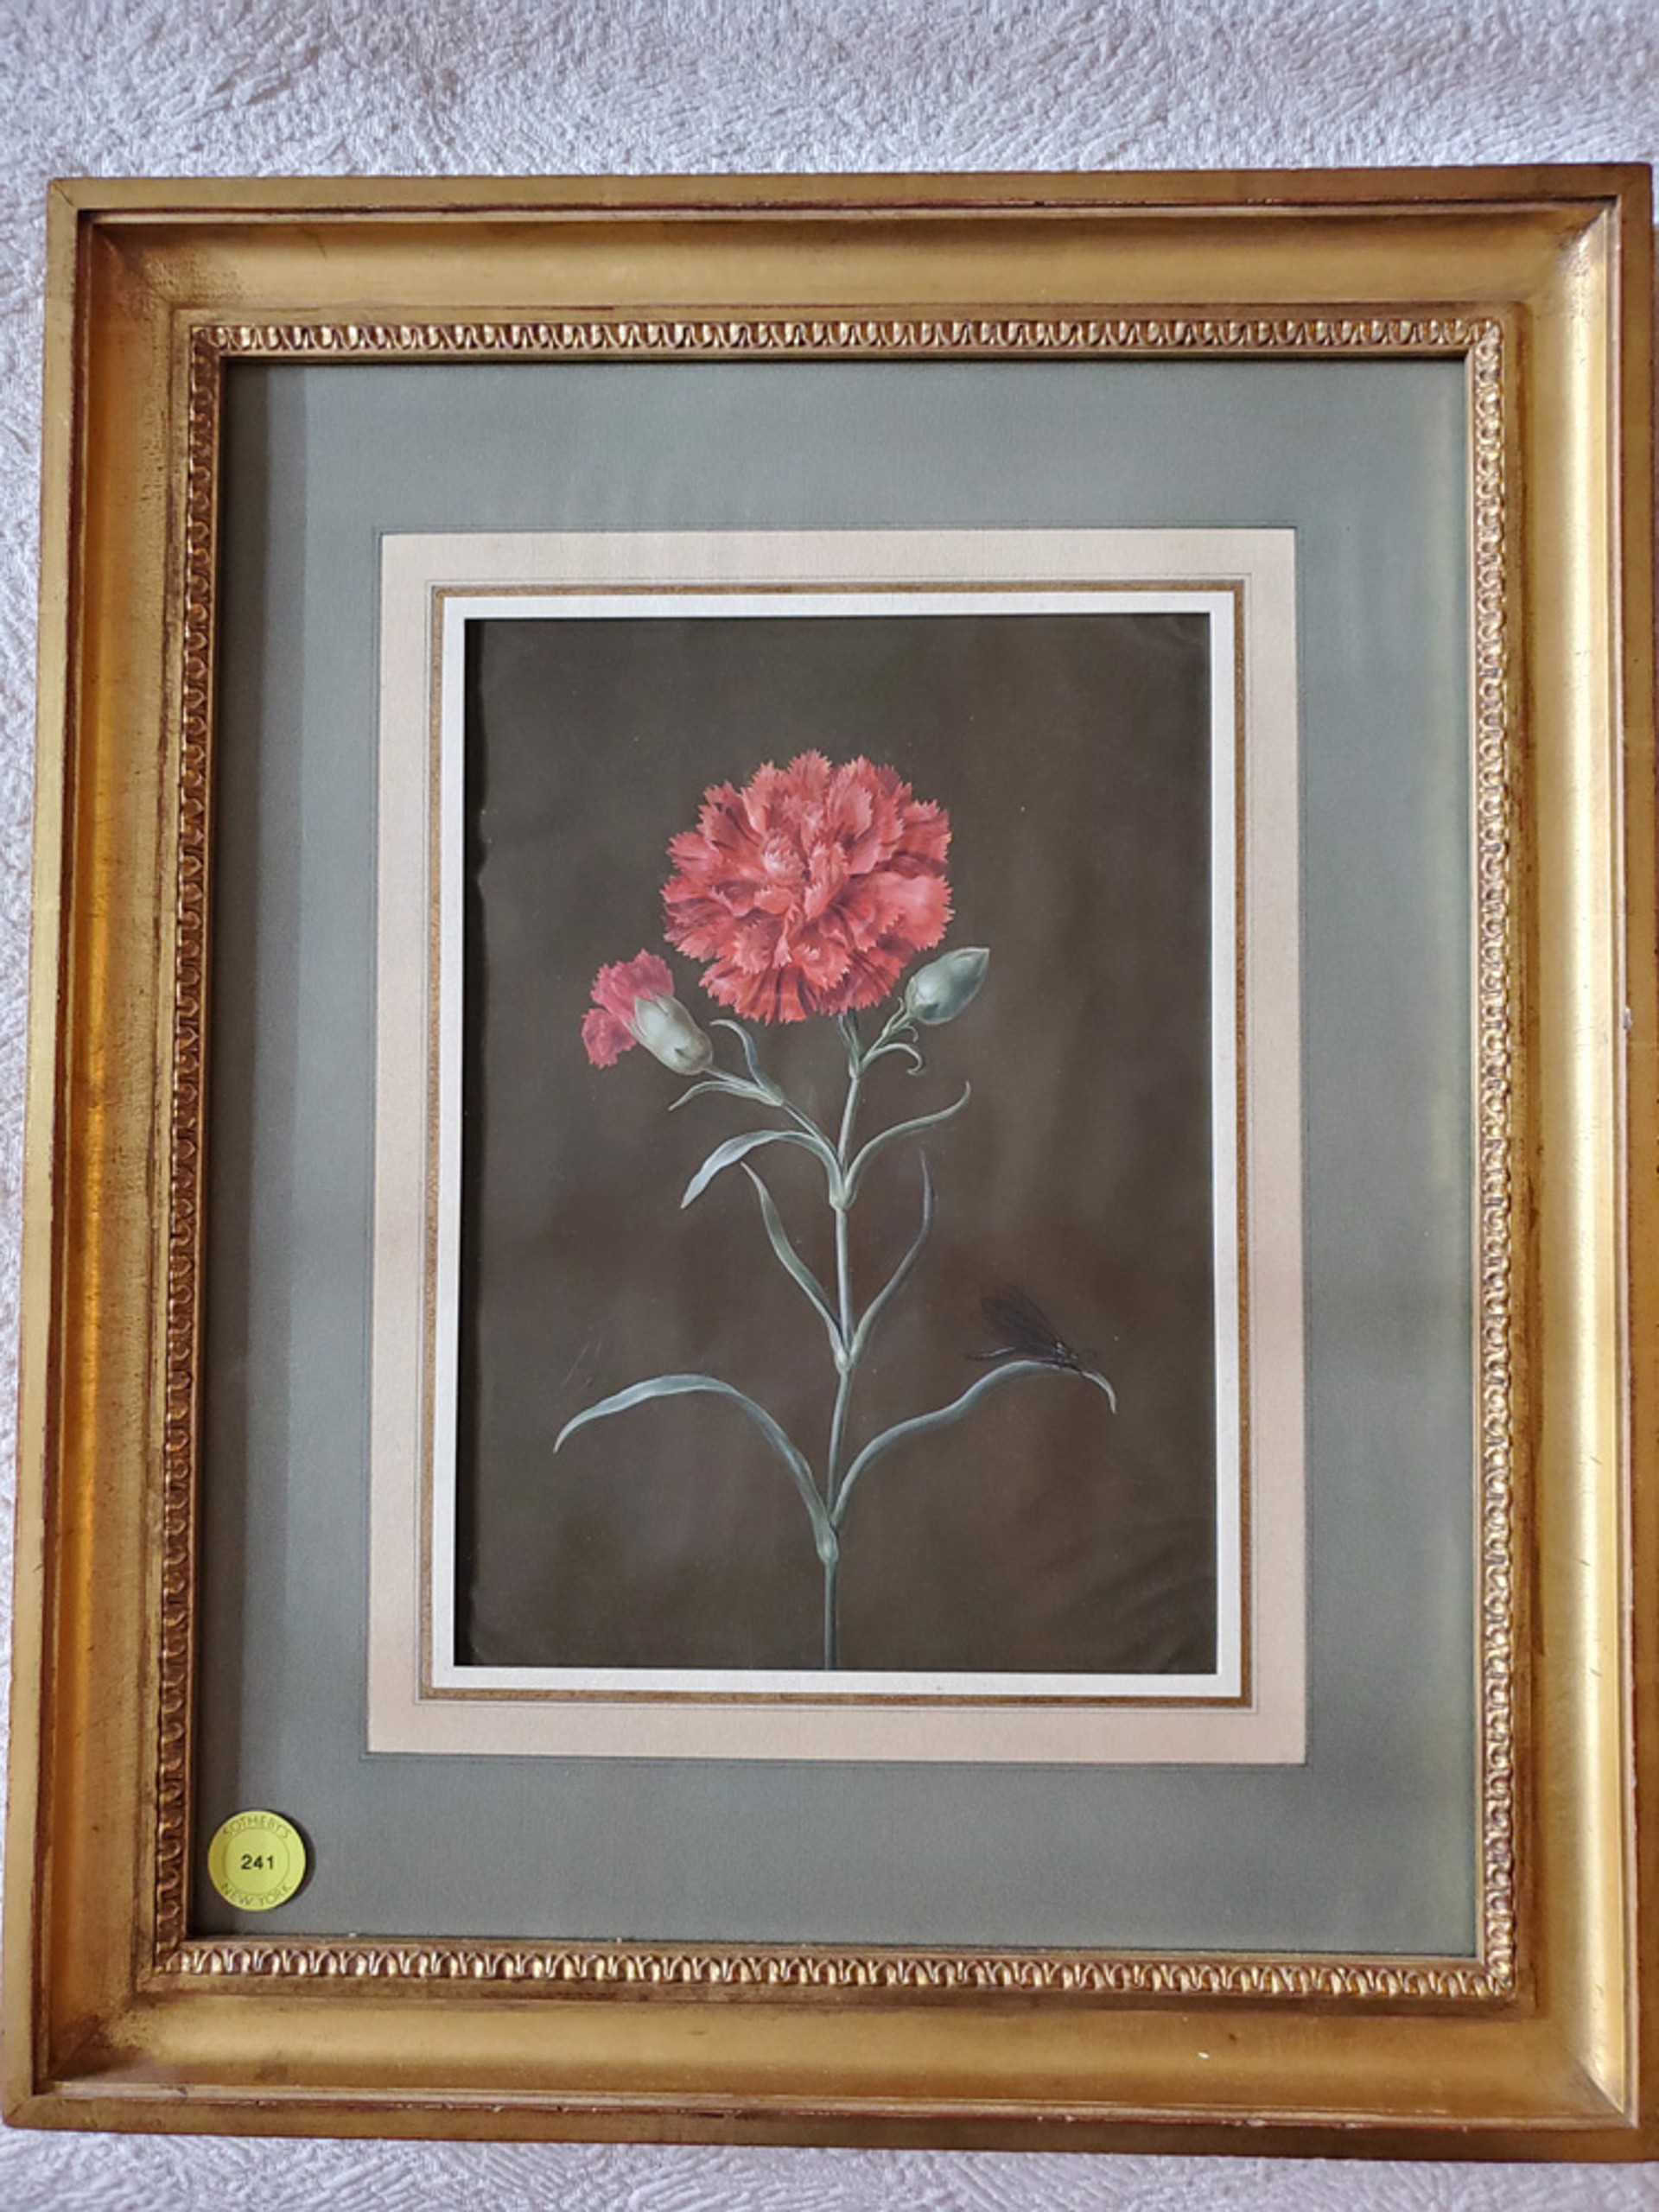 A Carnation with Fly by Margaretha Barbara Dietzsch